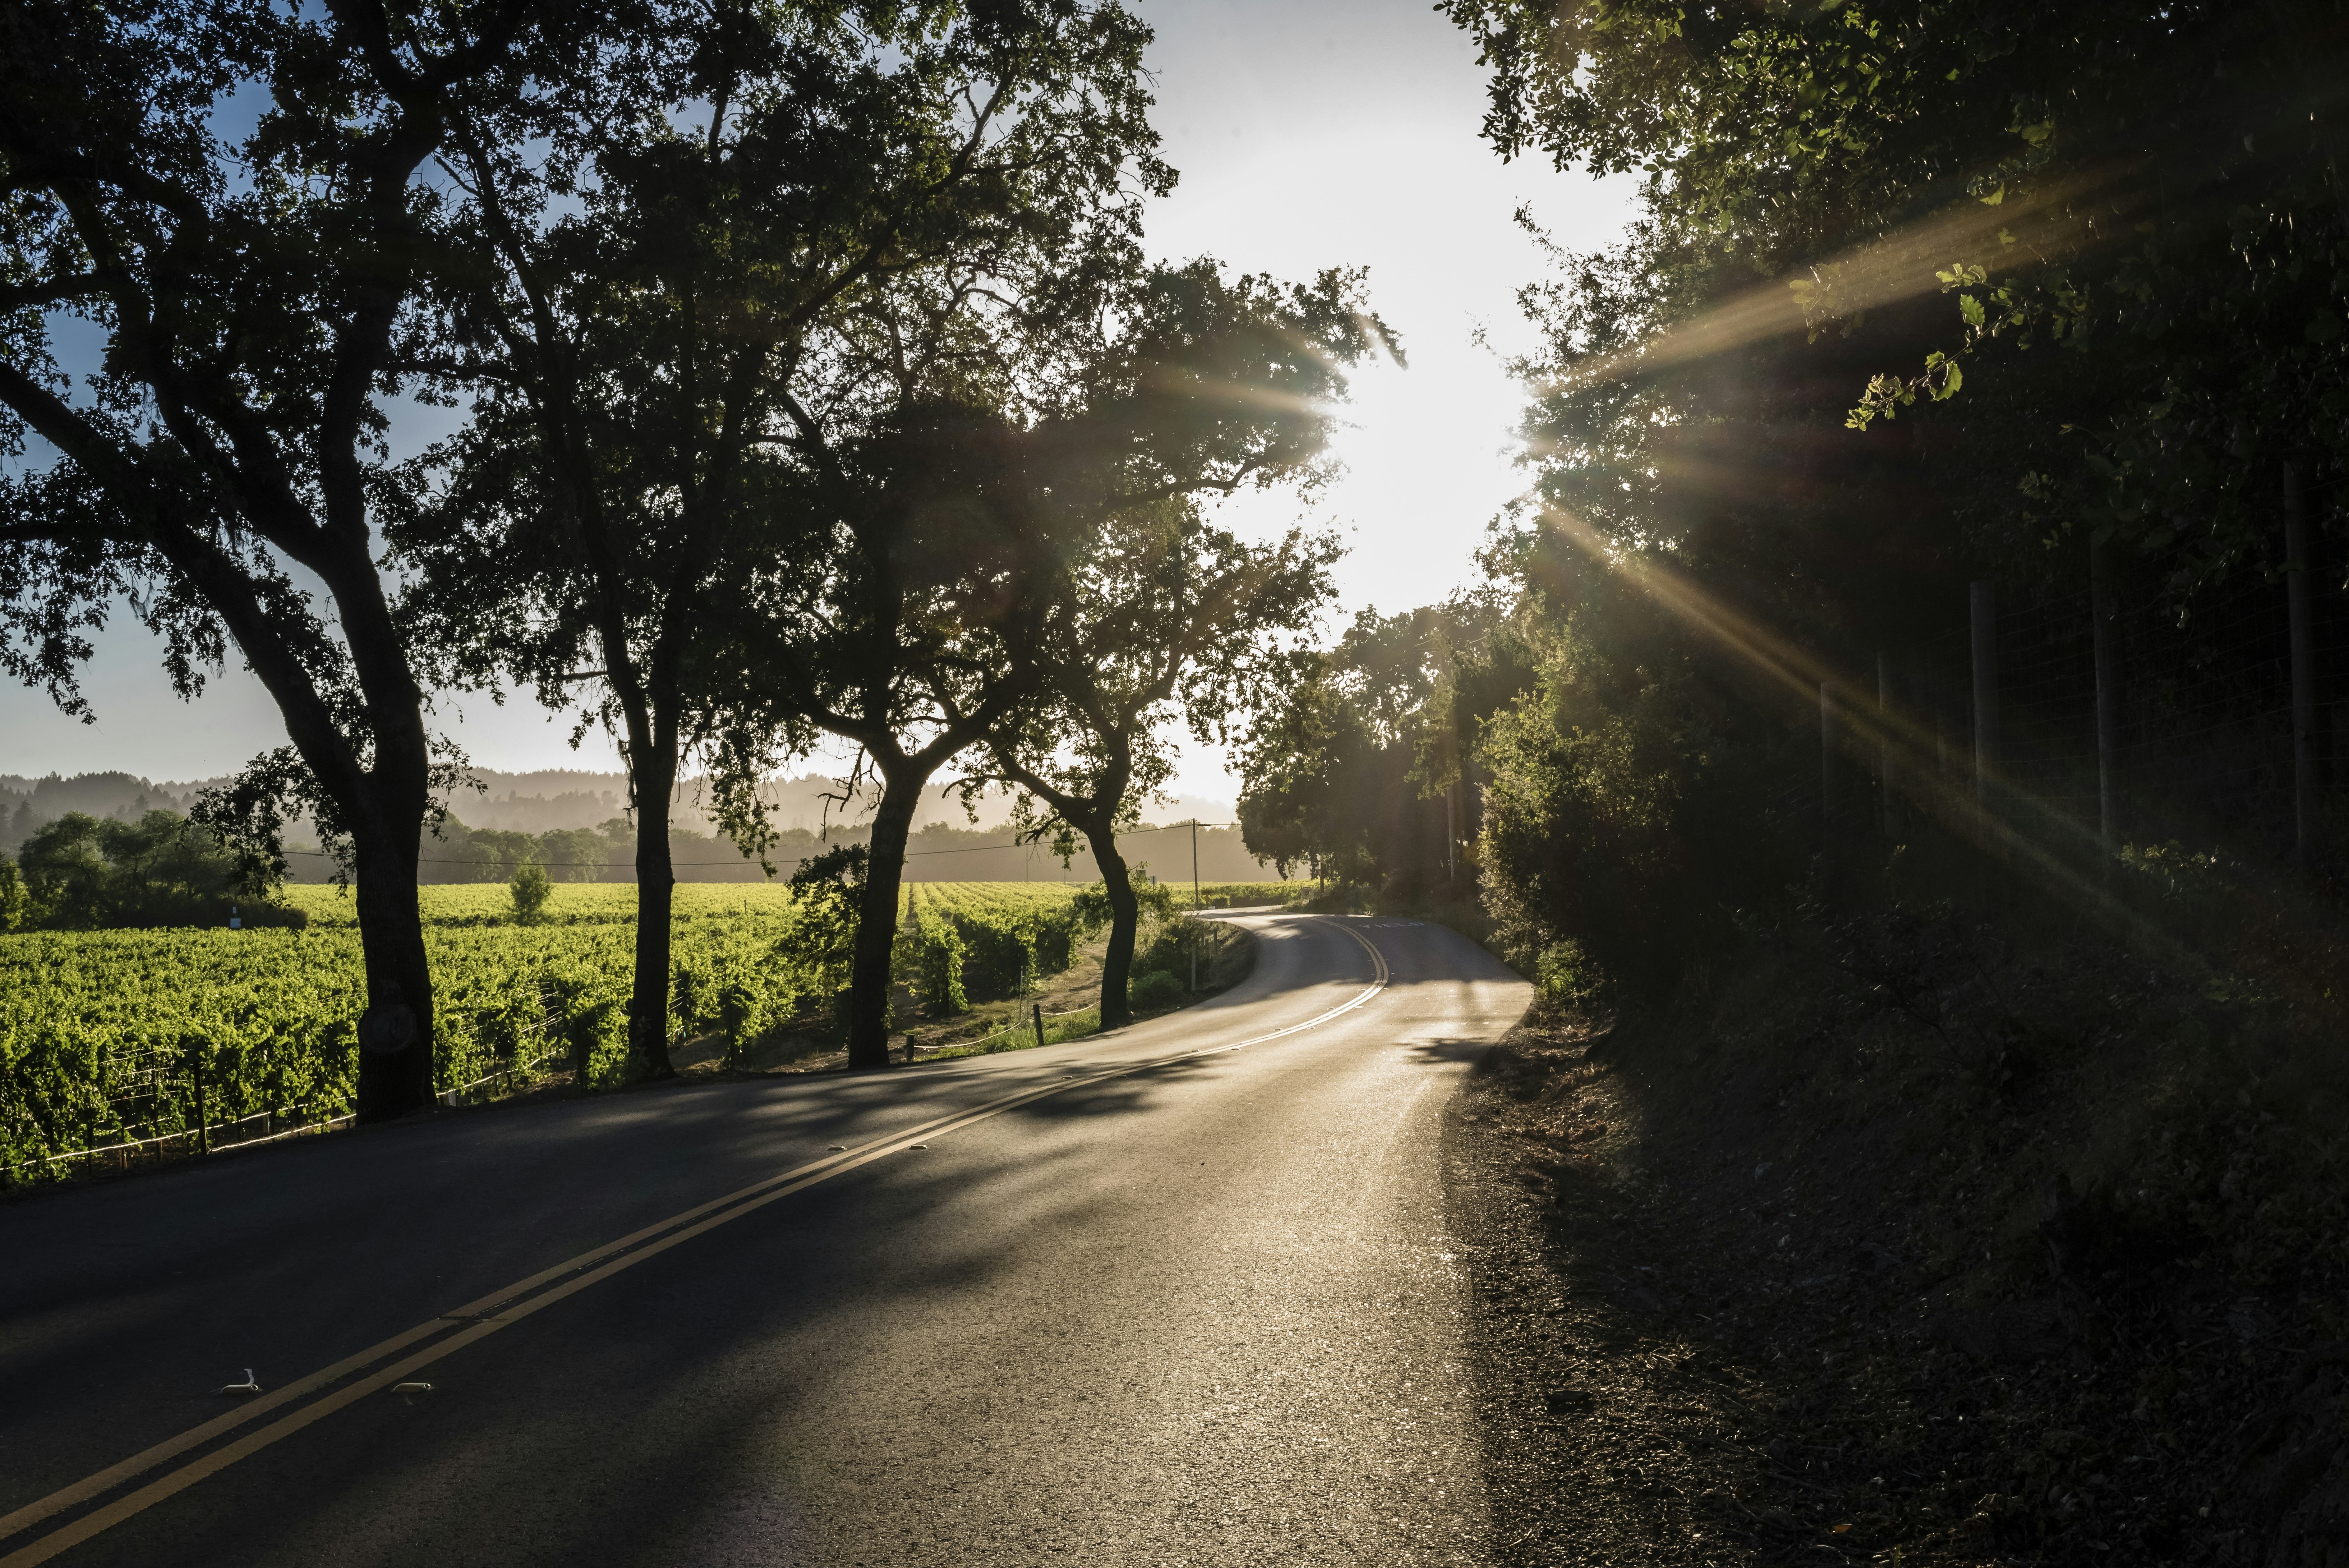 An empty road bordered by vineyards and trees with the sun in the background